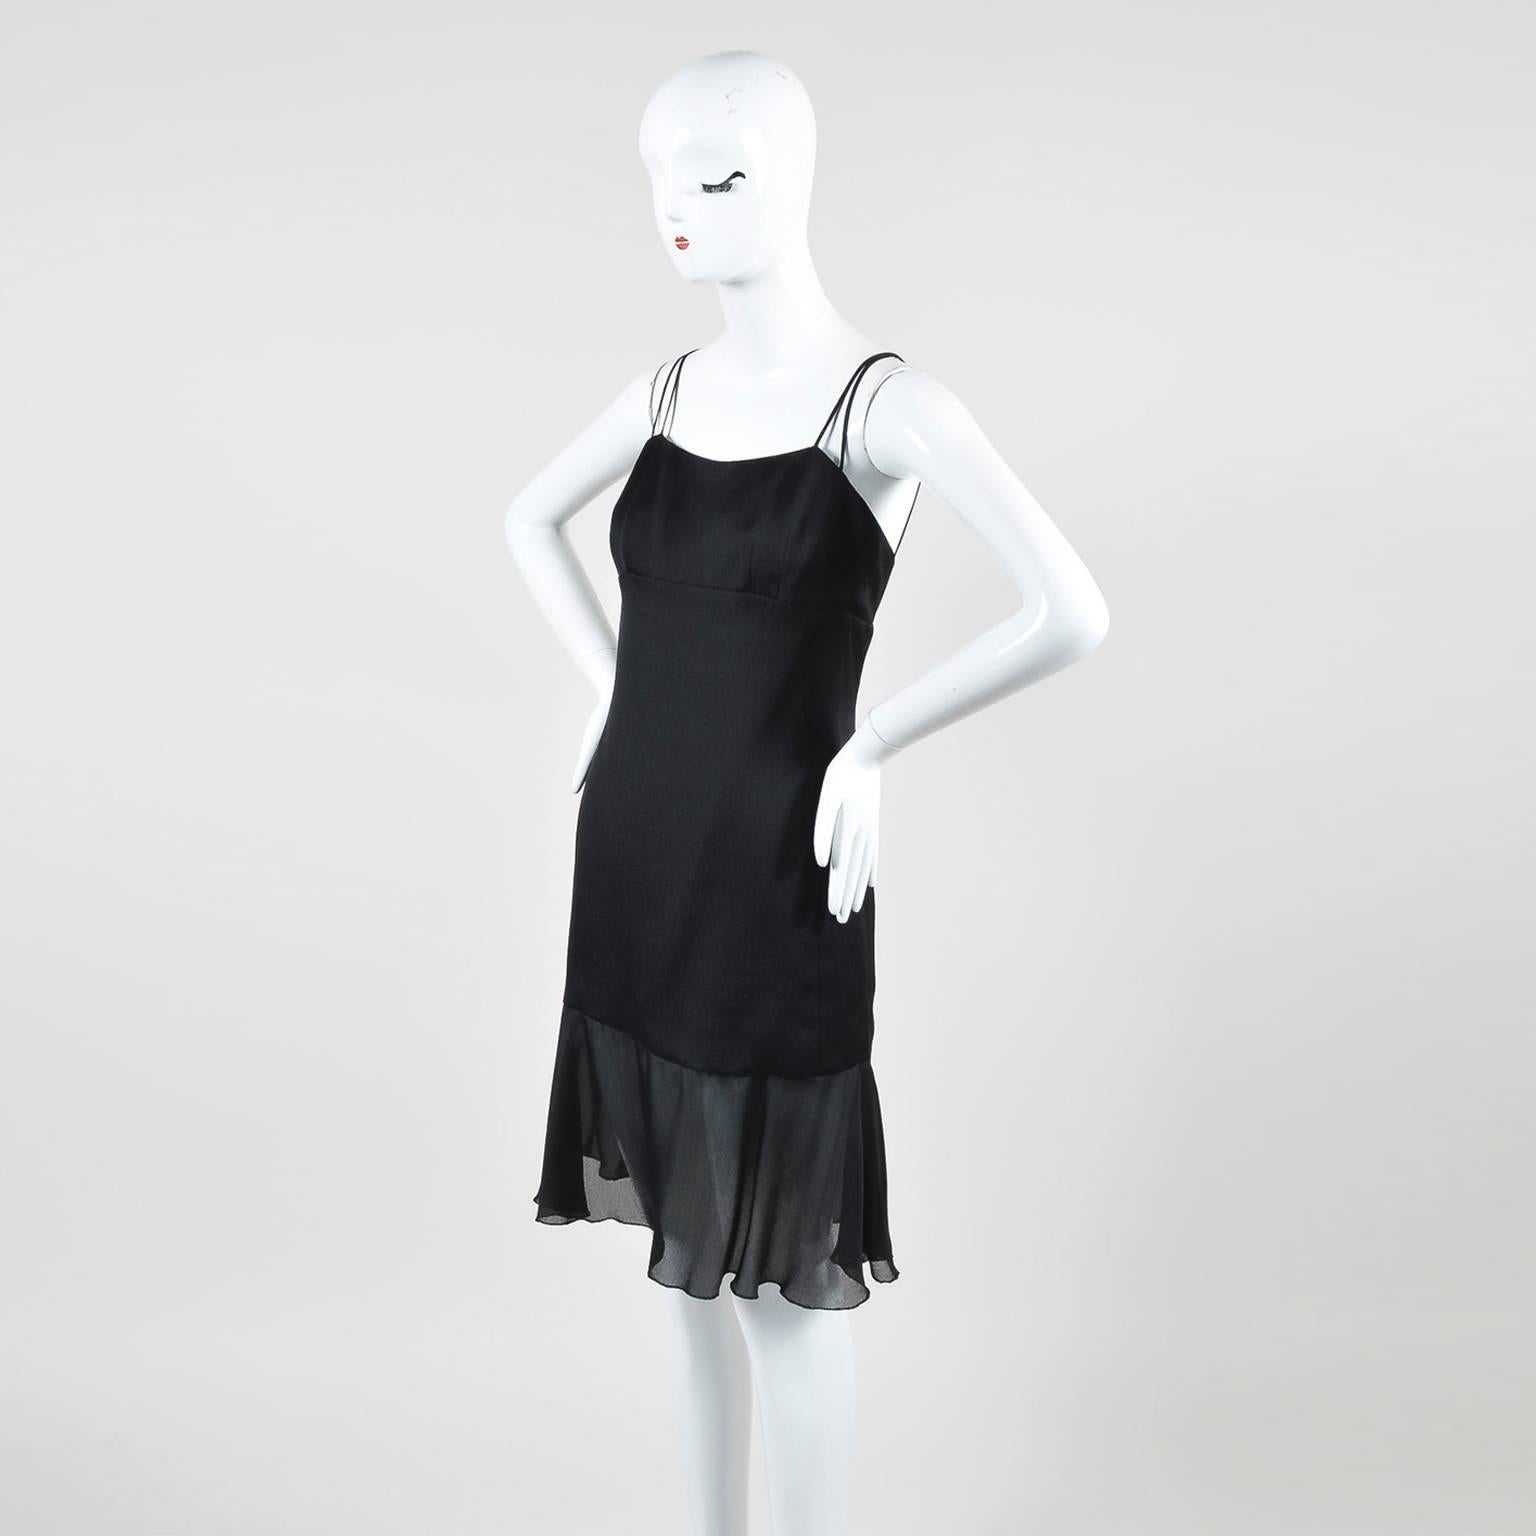 This black silk dress is finished with a chiffon ruffle hem. There are three spaghetti straps on each shoulder that meet at a 'CC' logo button in back. Zip closure down back. Lined.